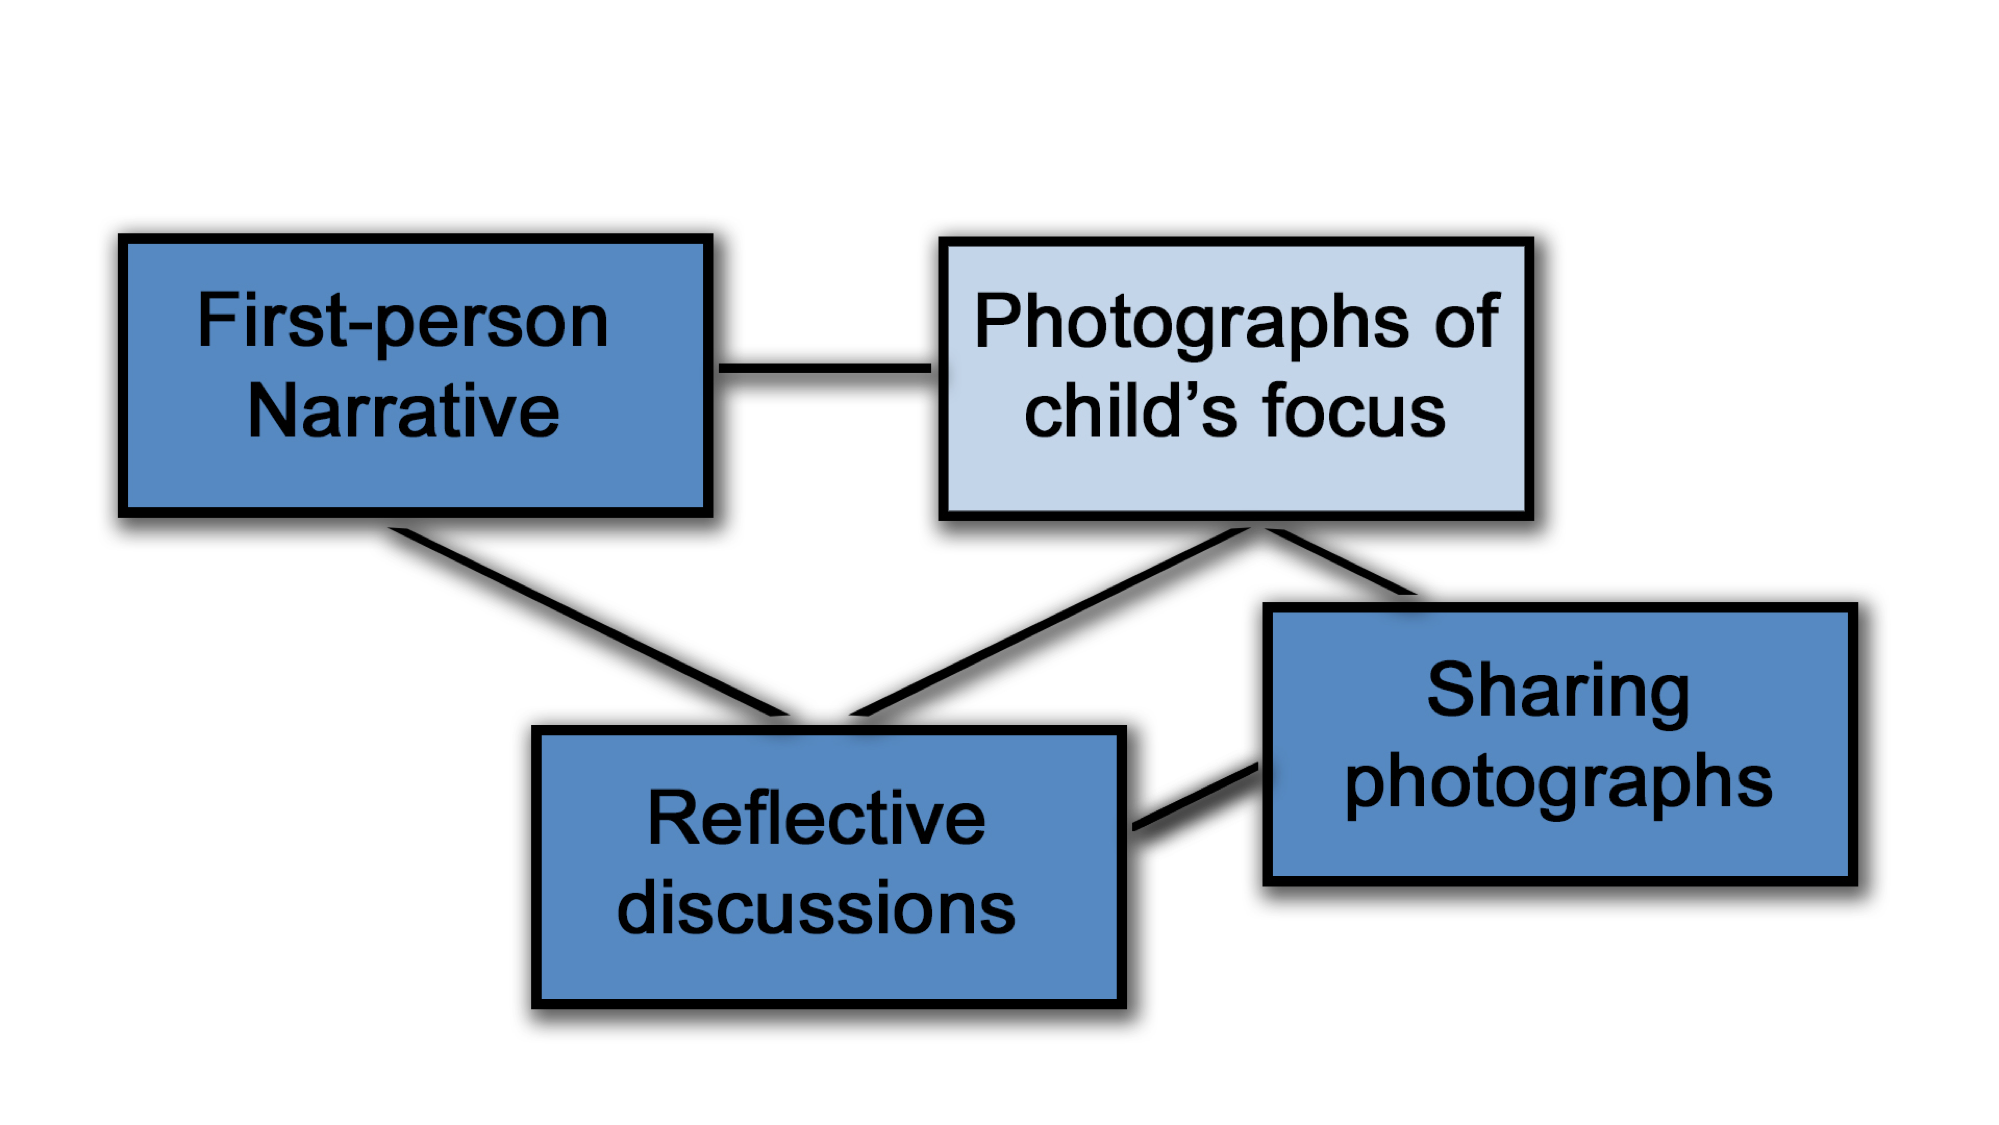 There are four boxes, First person narrative, photographs of child's focus, reflective discussions and sharing photographs. Lines join them to each other. First Person narrative links to reflective discussions and photographs of child's focus, whilst these last two both link to sharing photographs as well. Photograph of child’s focus is highlighted..